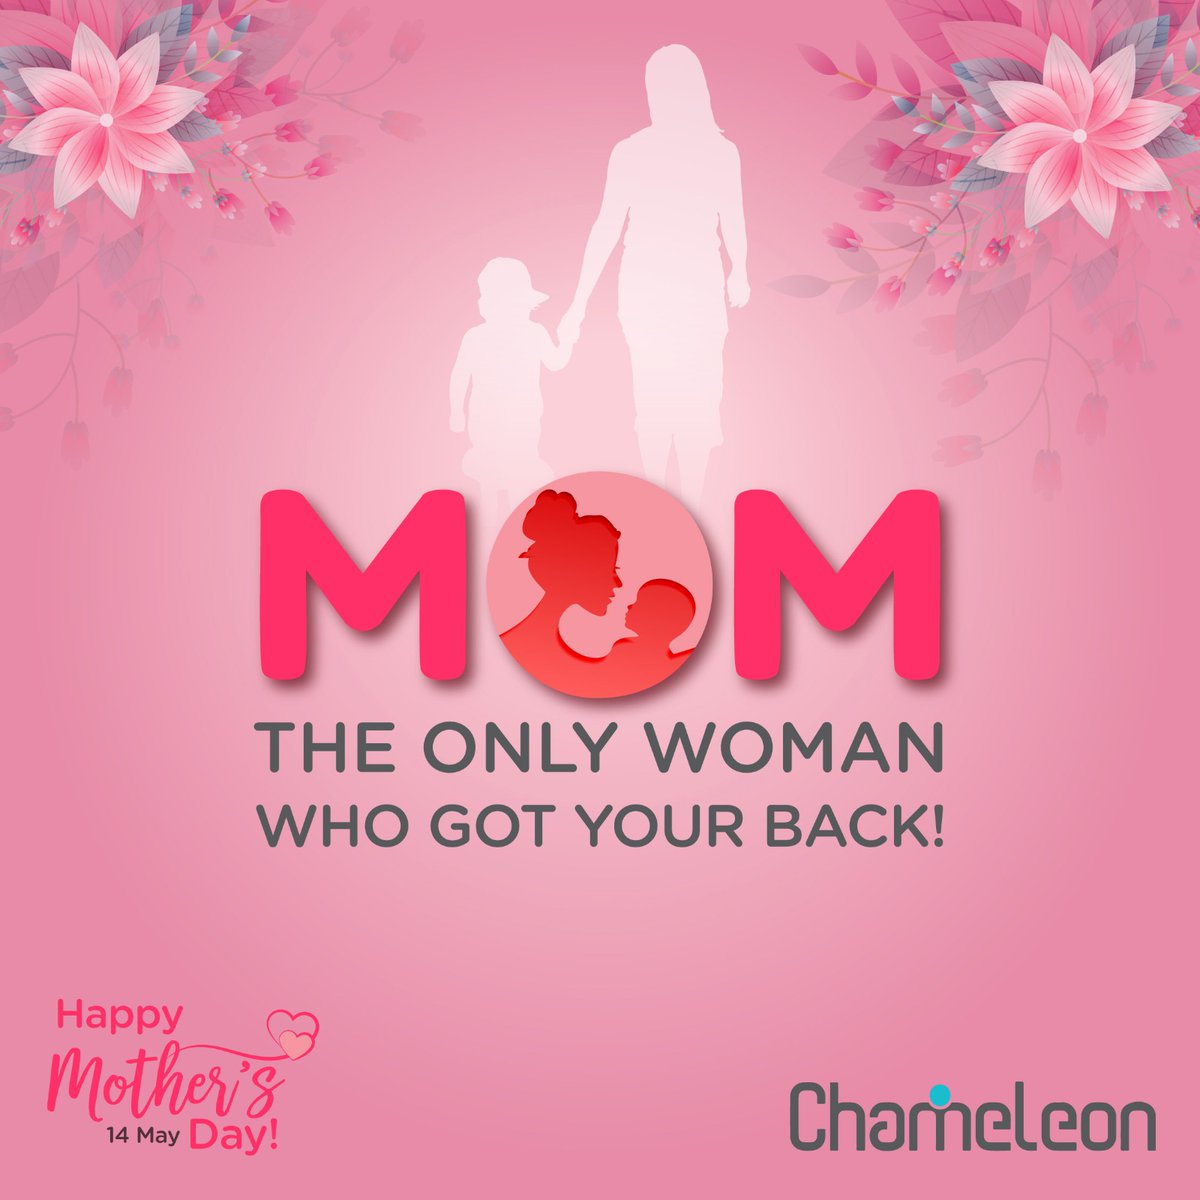 Behind every strong and successful person, there's a mother who never gave up on them

#mothers #Mothersday2023 #motherslove #motherspride #love #motherlycare